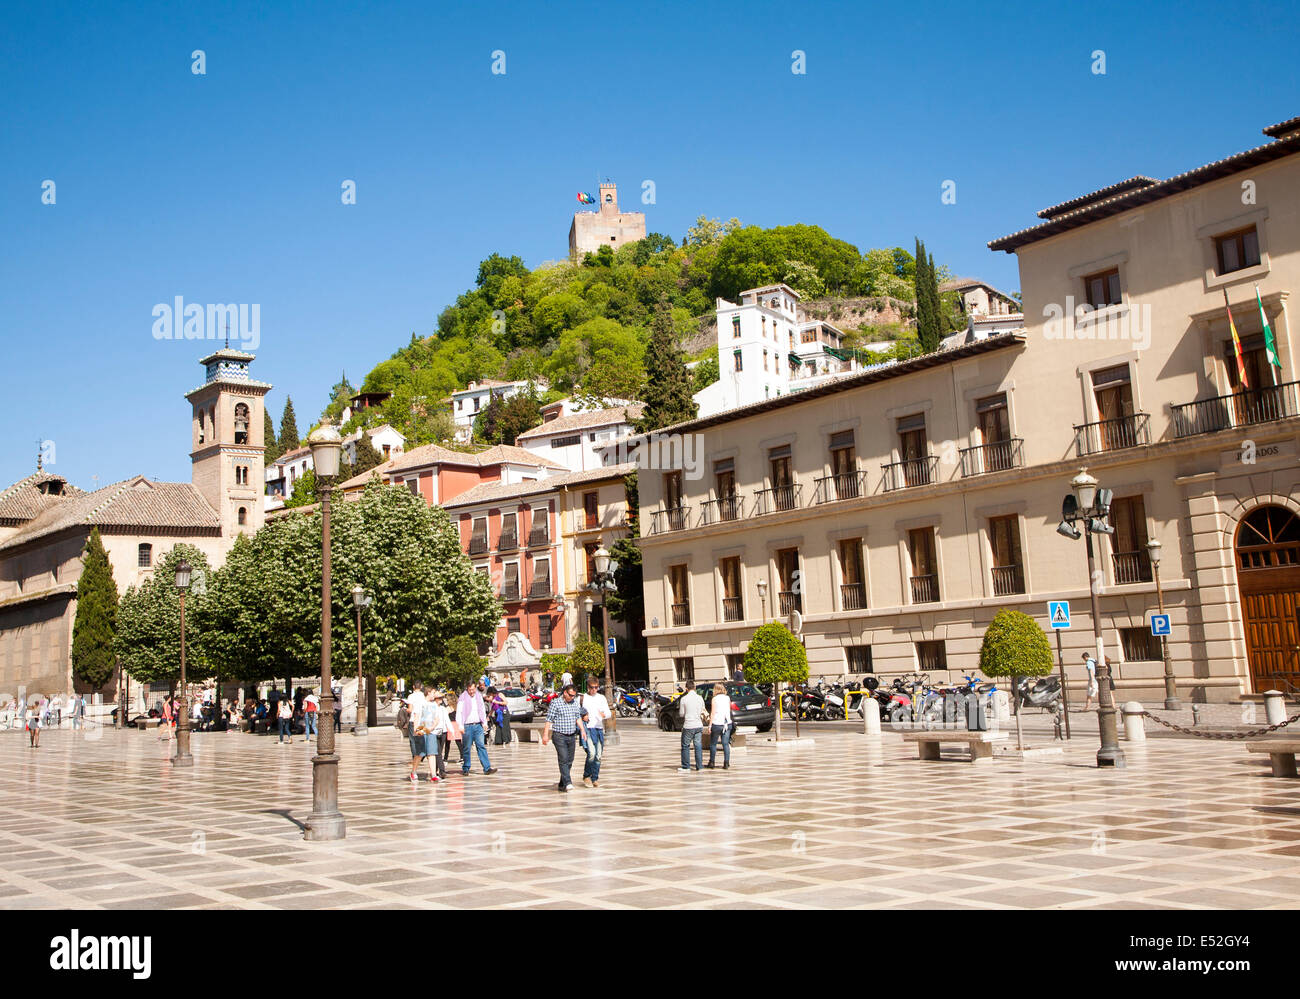 Historic buildings in Plaza Nueva, Granada, Spain looking up at part of the Alhambra on a hill top. Stock Photo